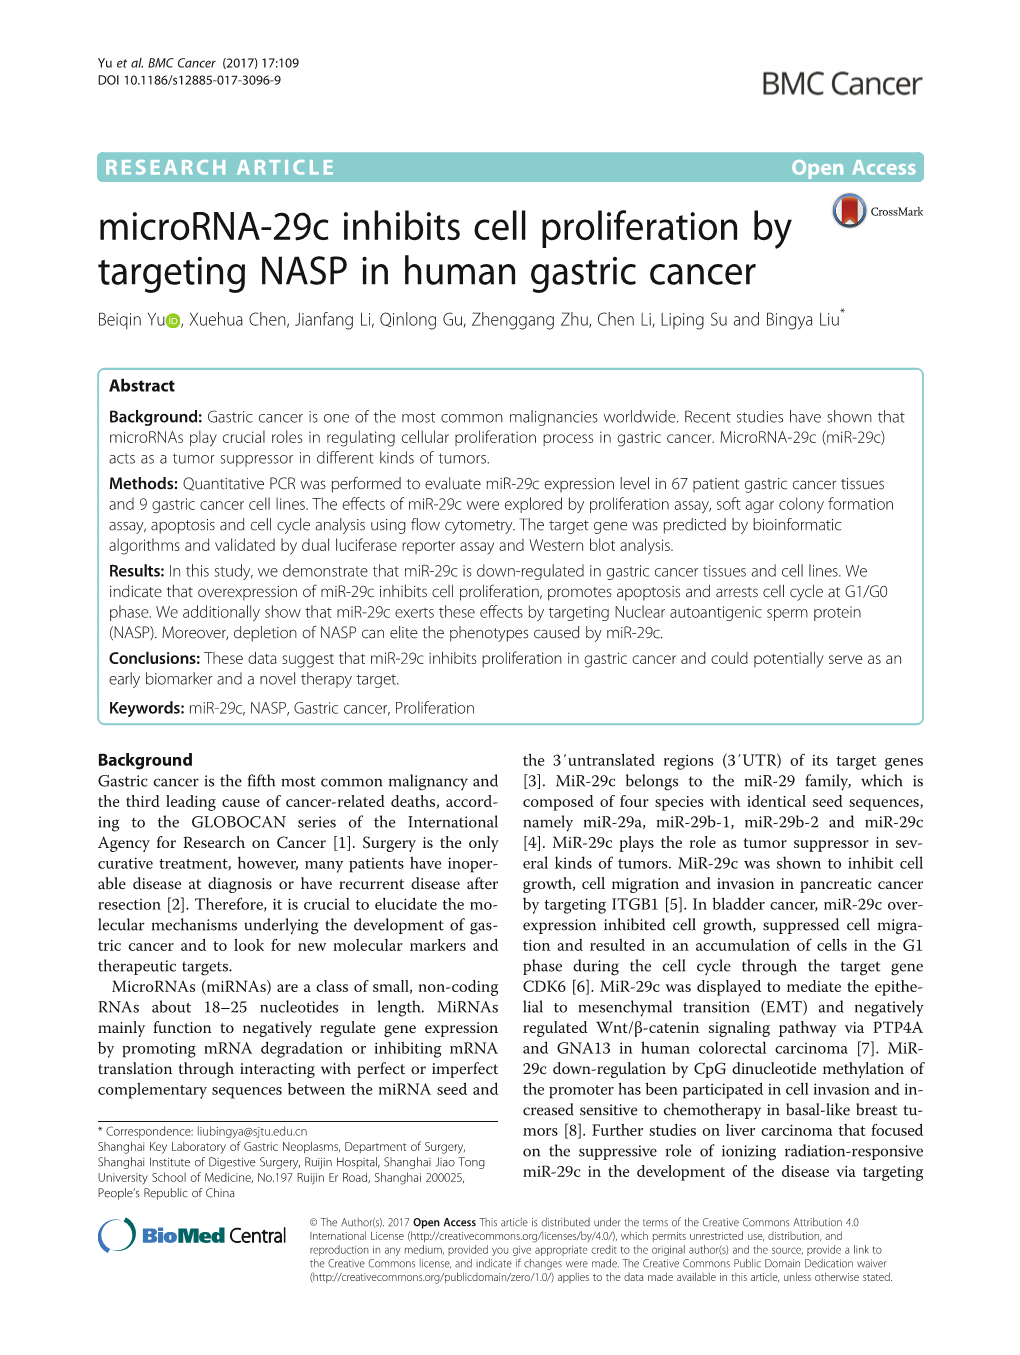 Microrna-29C Inhibits Cell Proliferation by Targeting NASP In